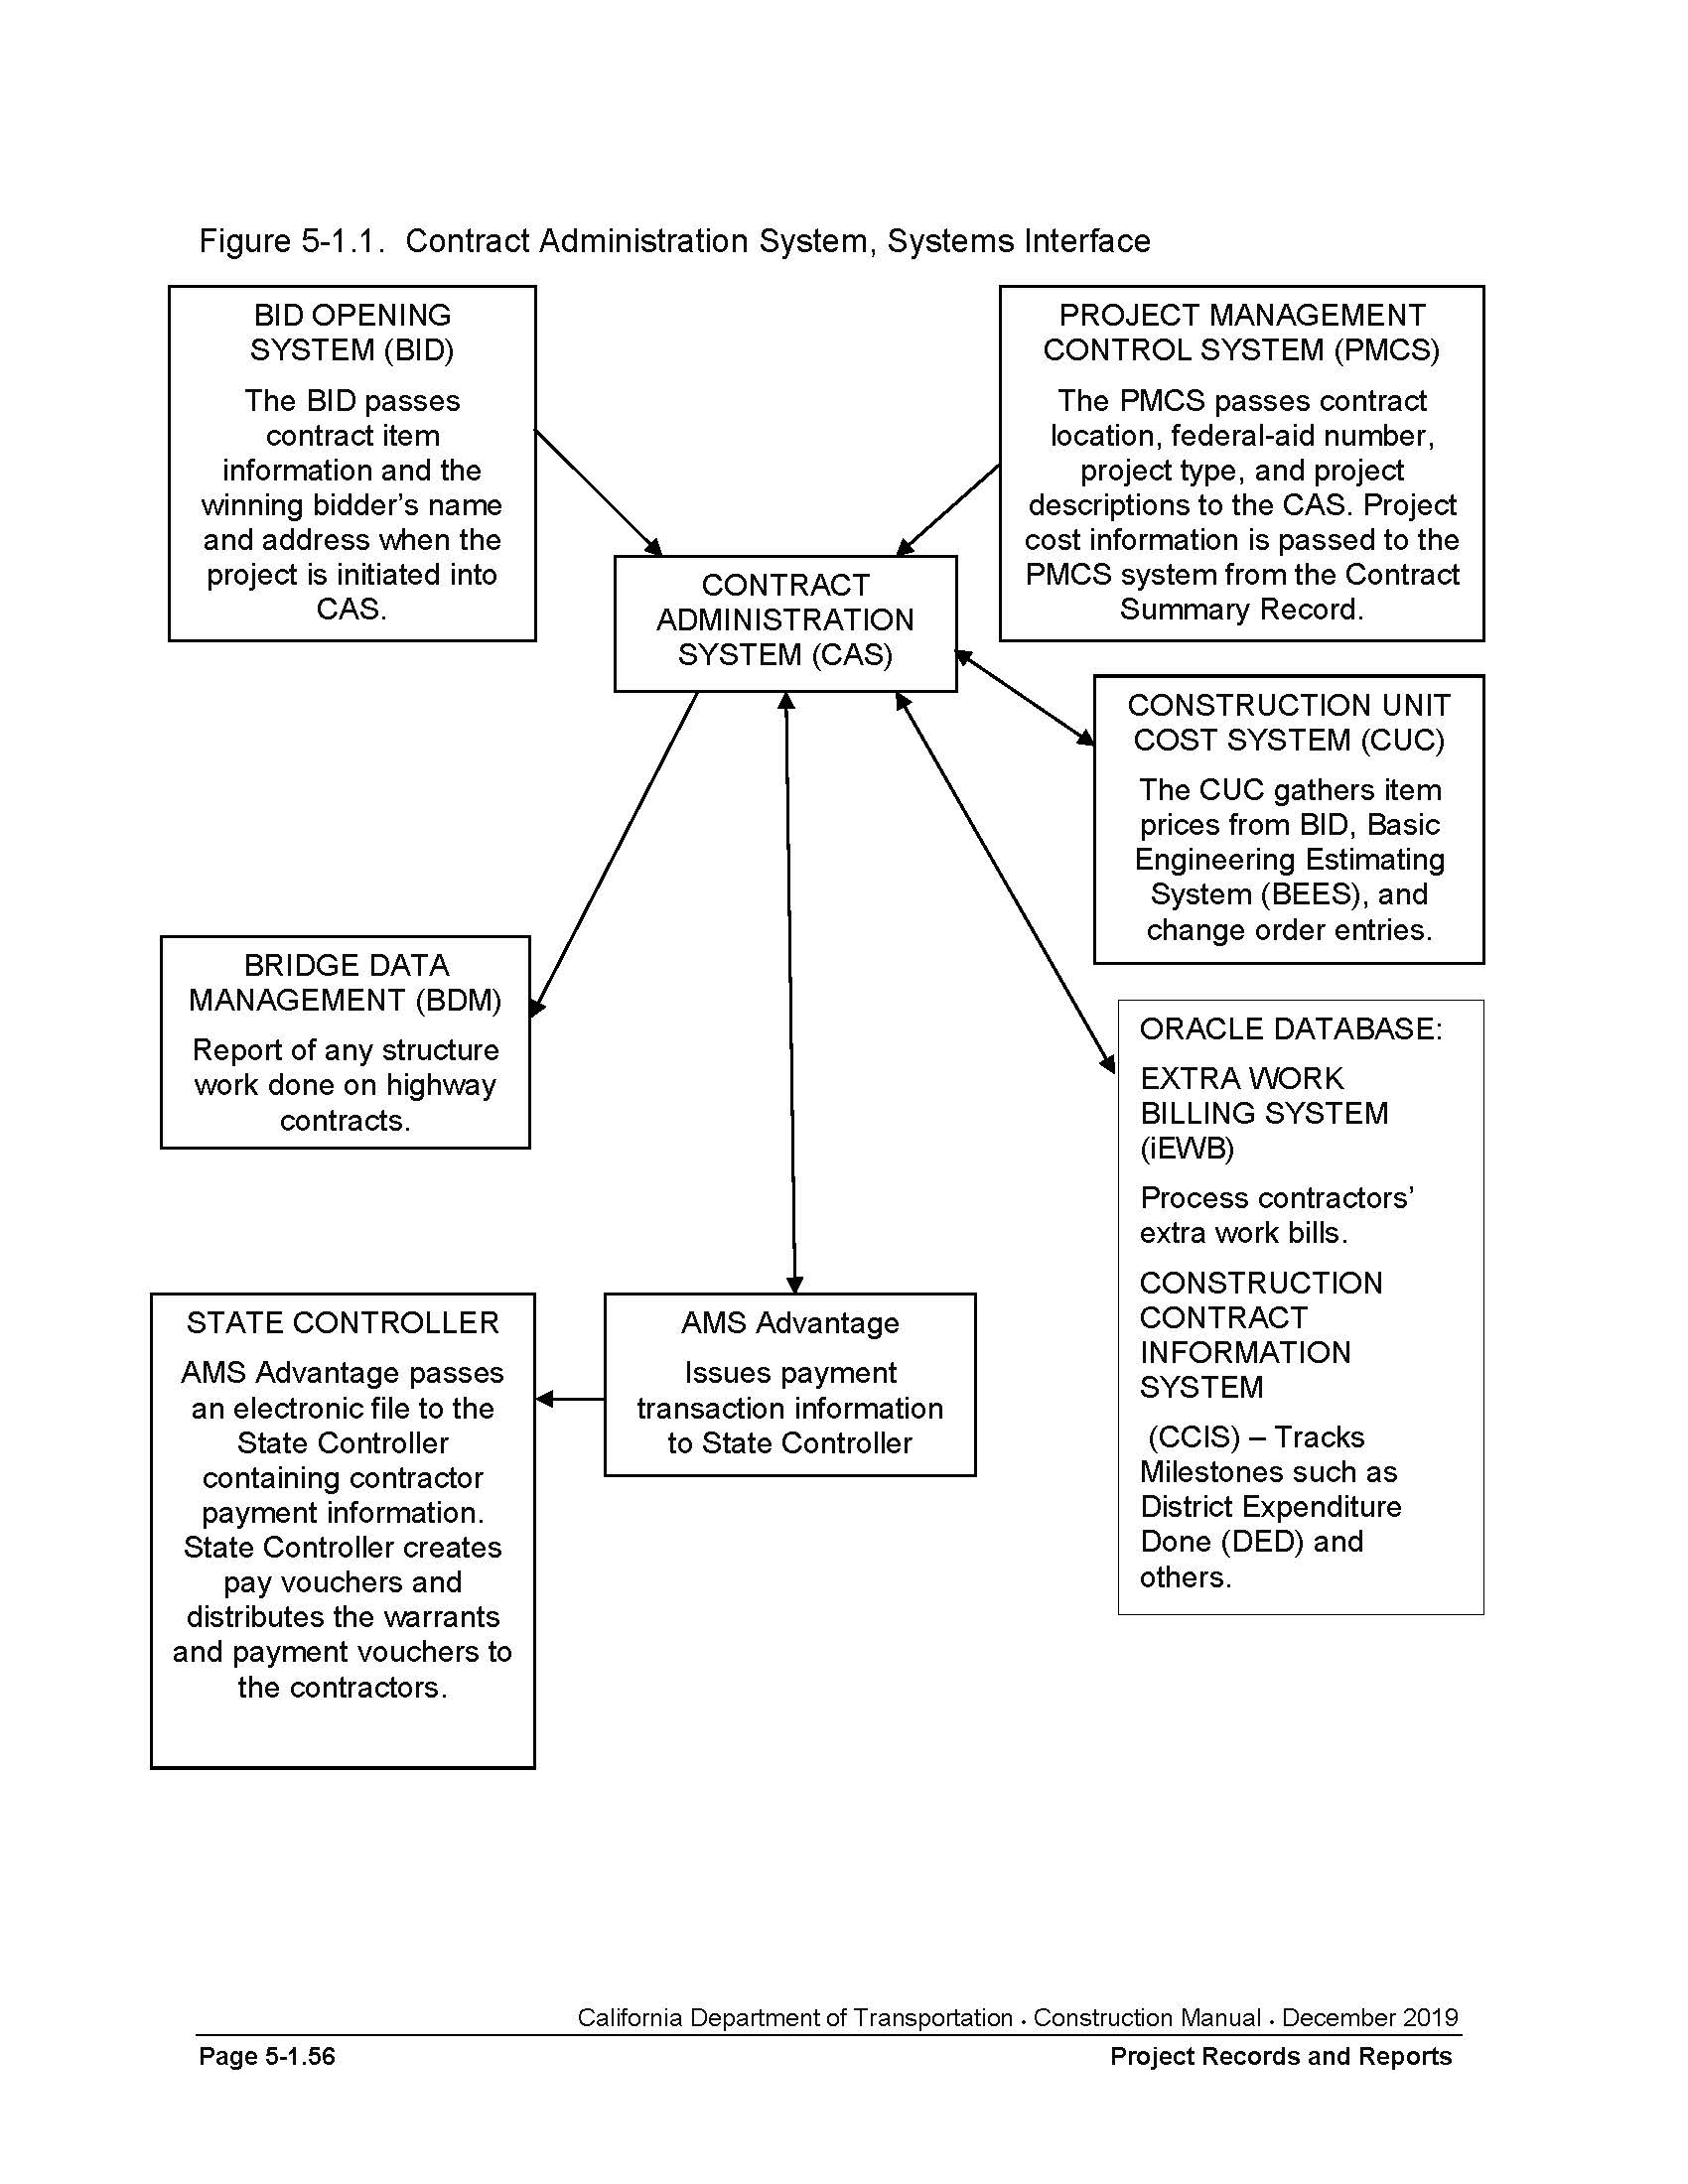 Flow chart of Caltrans' Contract Administration System, Systems Interface